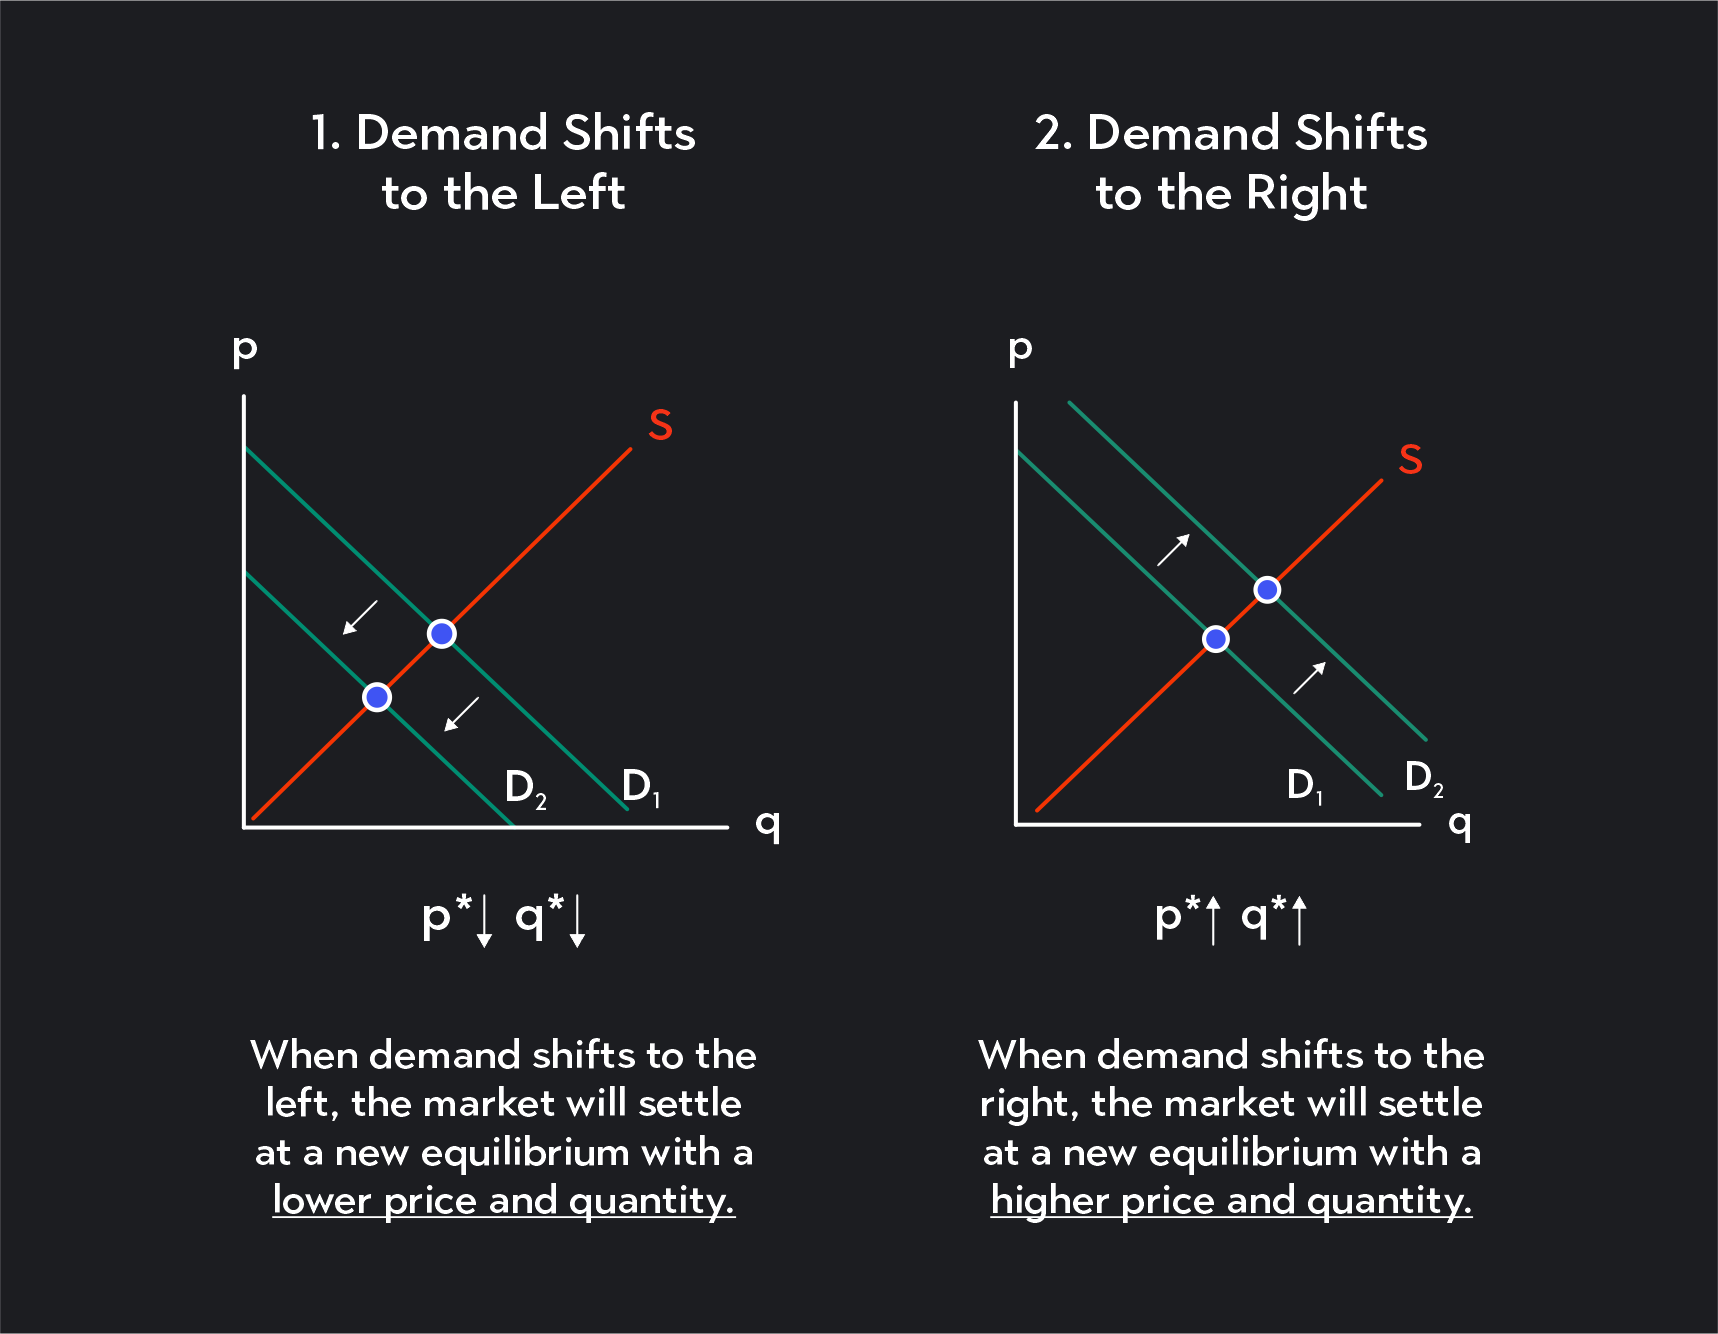 Graph showing how demand shifts to the left and right